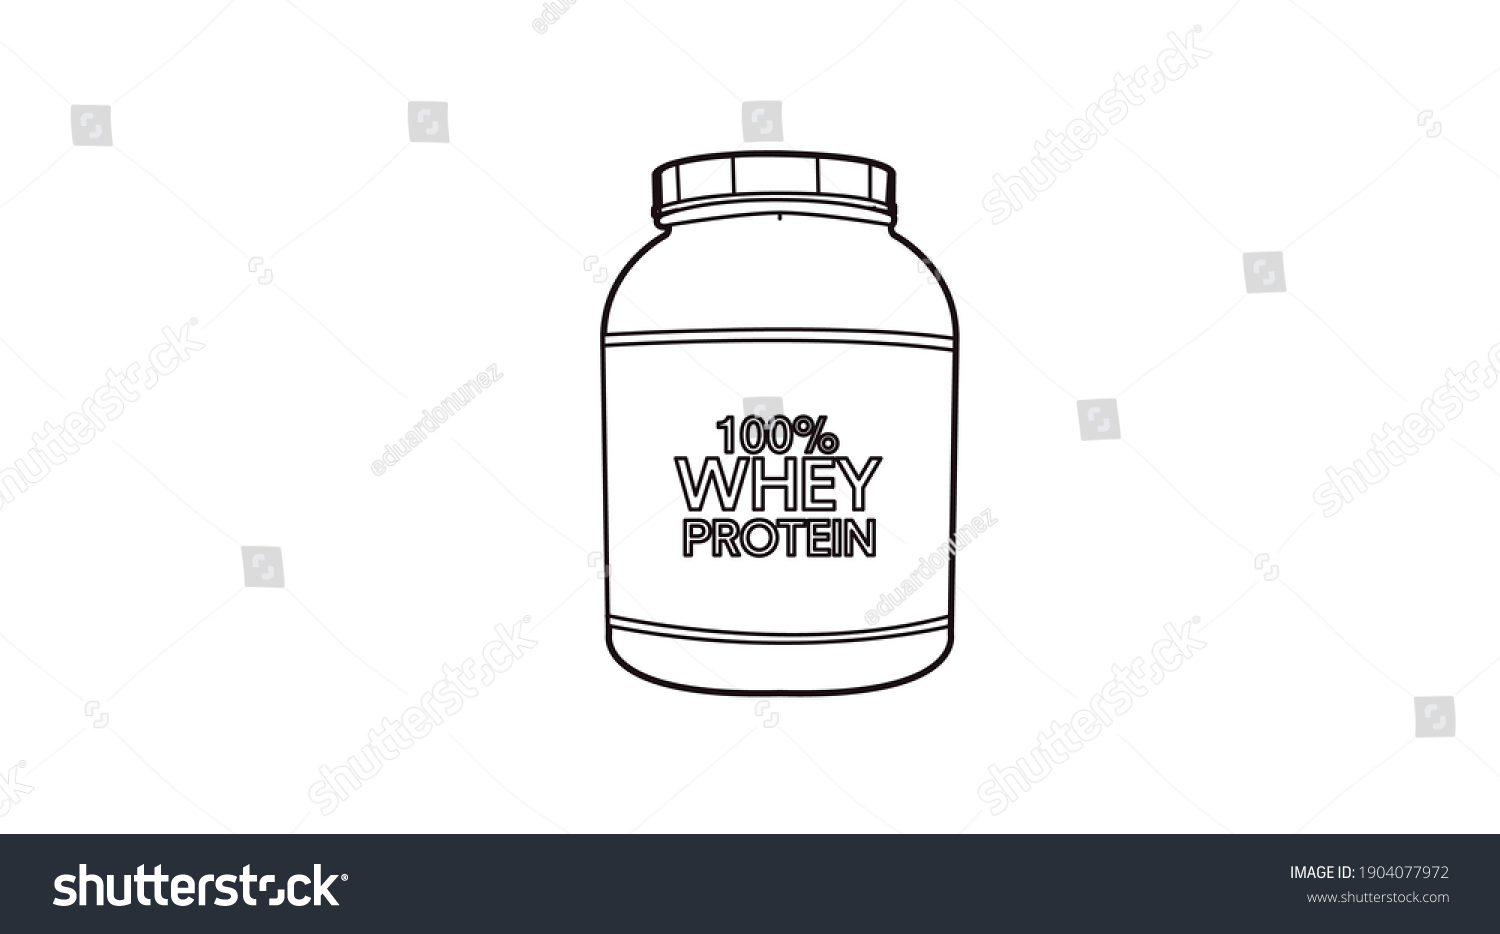 Vector Illustrations Of Whey Protein Bottle Royalty Free Stock Vector 1904077972 3701